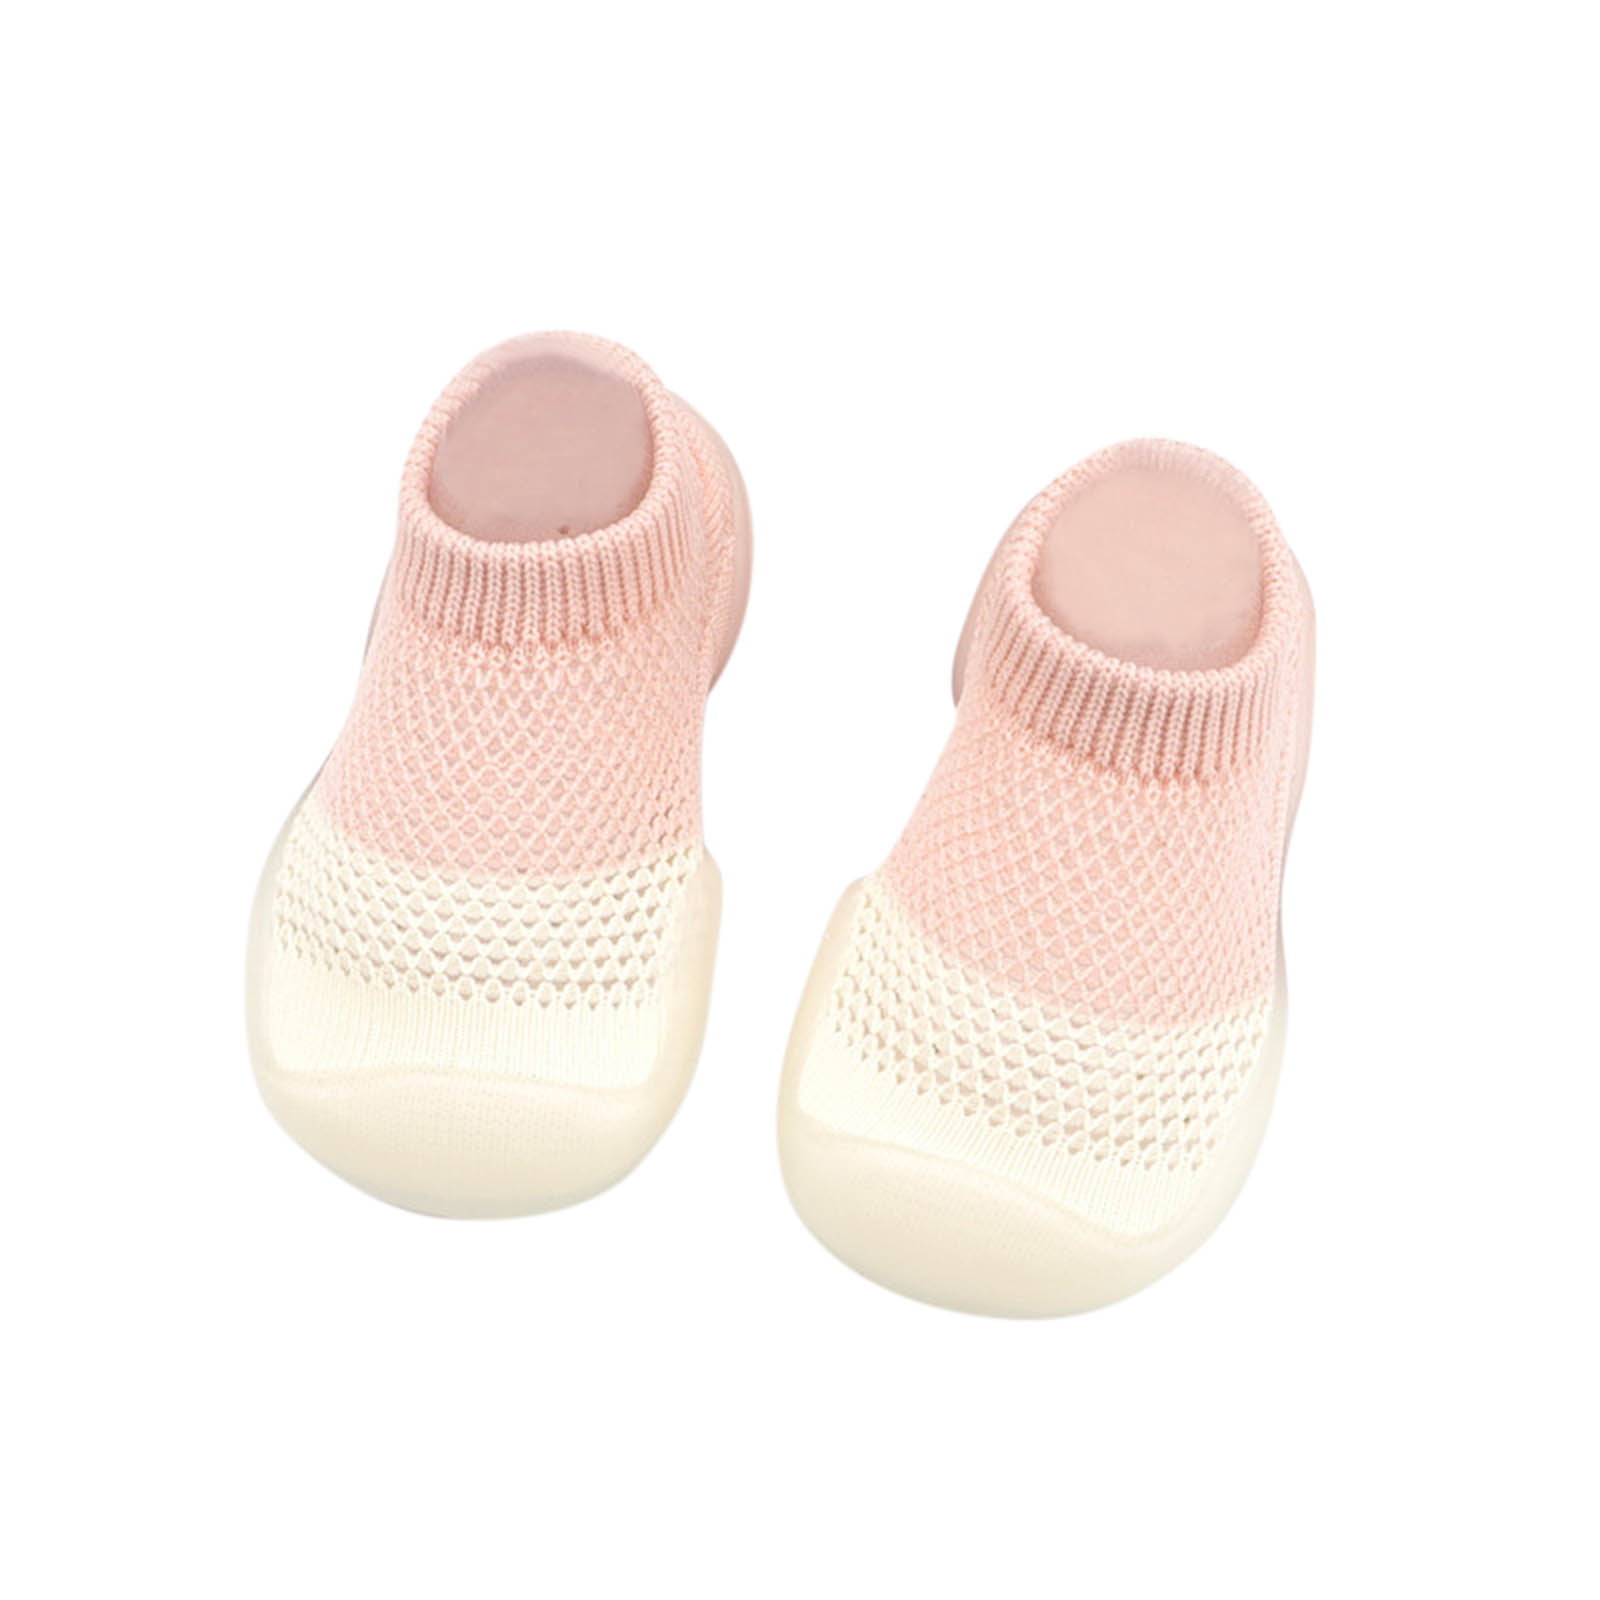 MPWEGNP Walkers Mixed Indoor Elastic Baby Mesh First Shoes Toddler ...